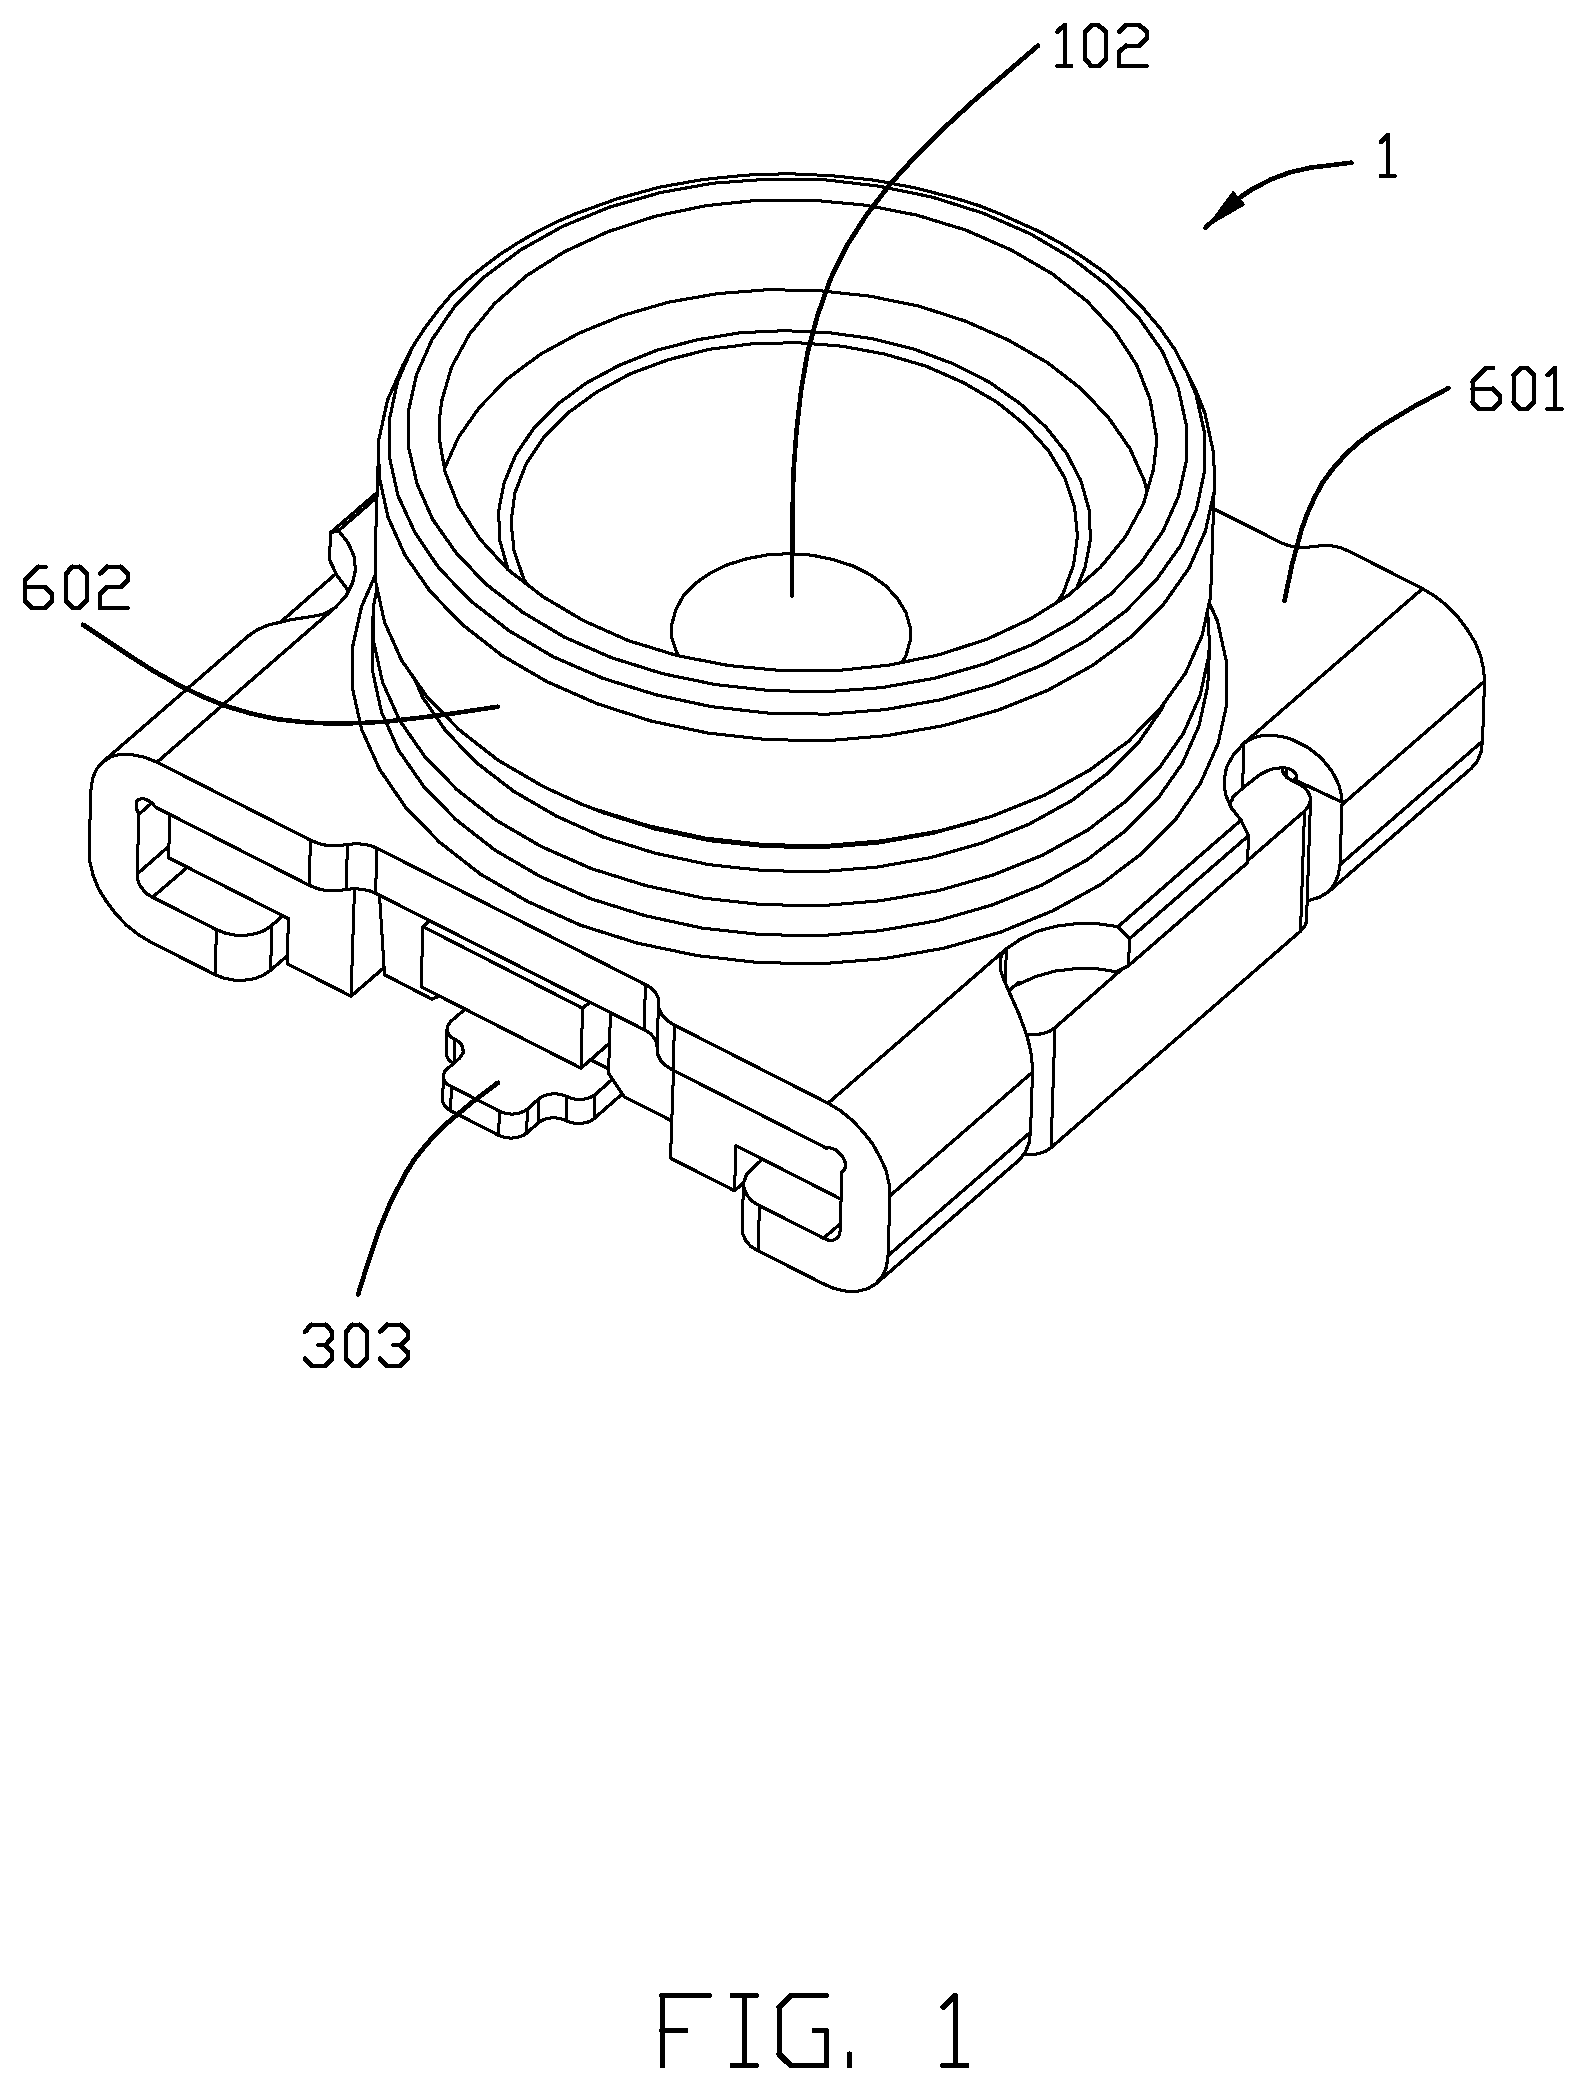 Coaxial connector with a new type of contact